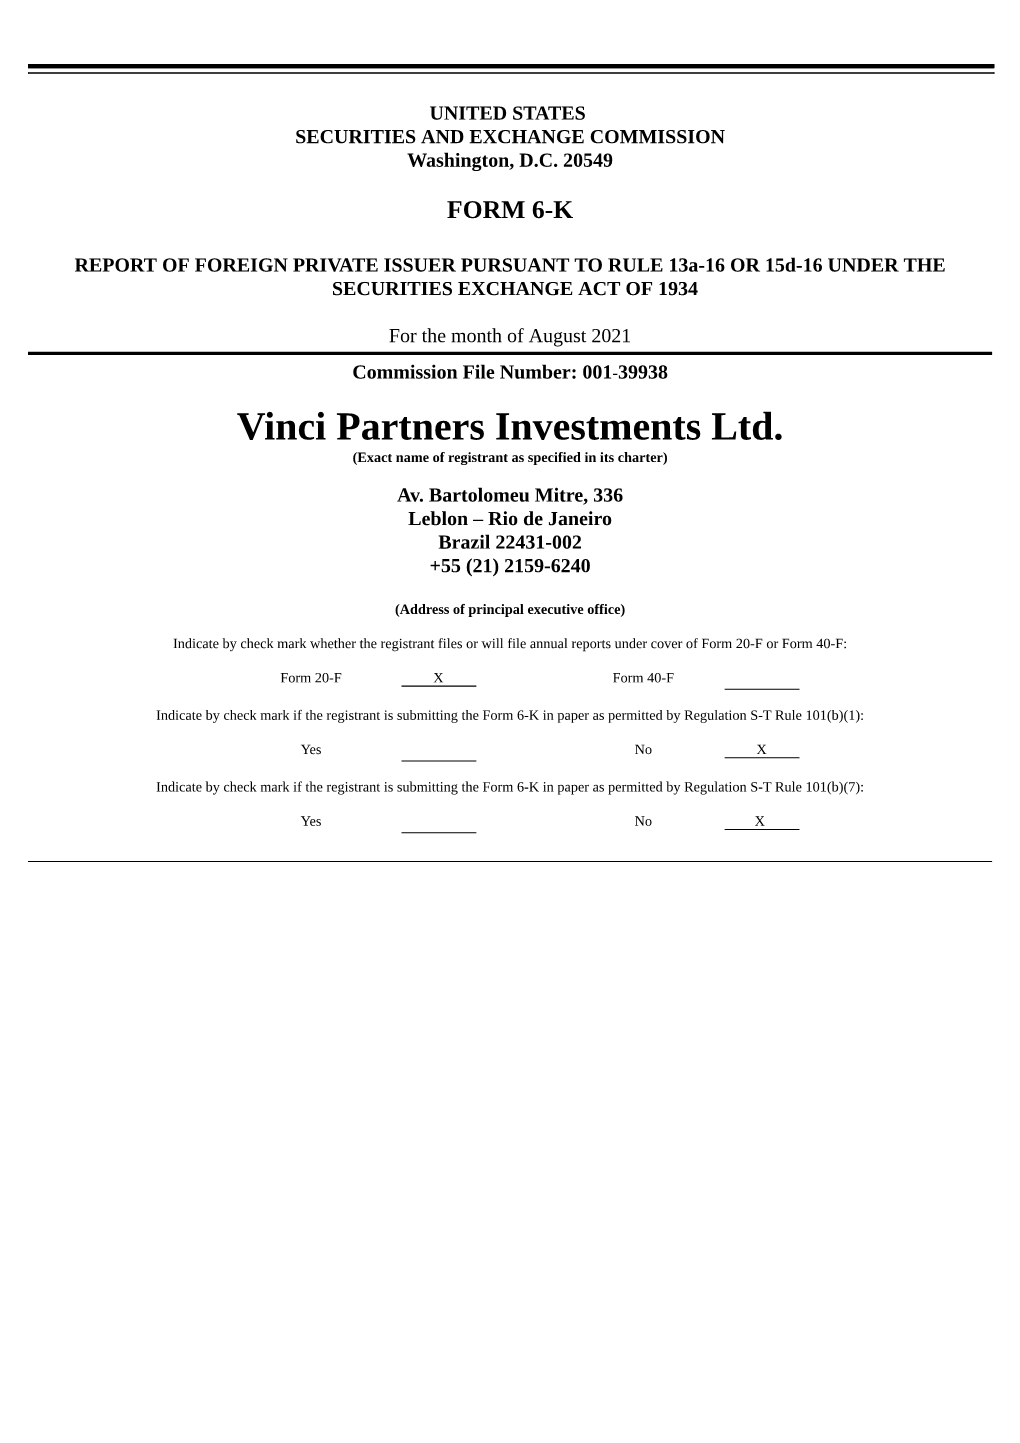 Vinci Partners Investments Ltd. (Exact Name of Registrant As Specified in Its Charter)